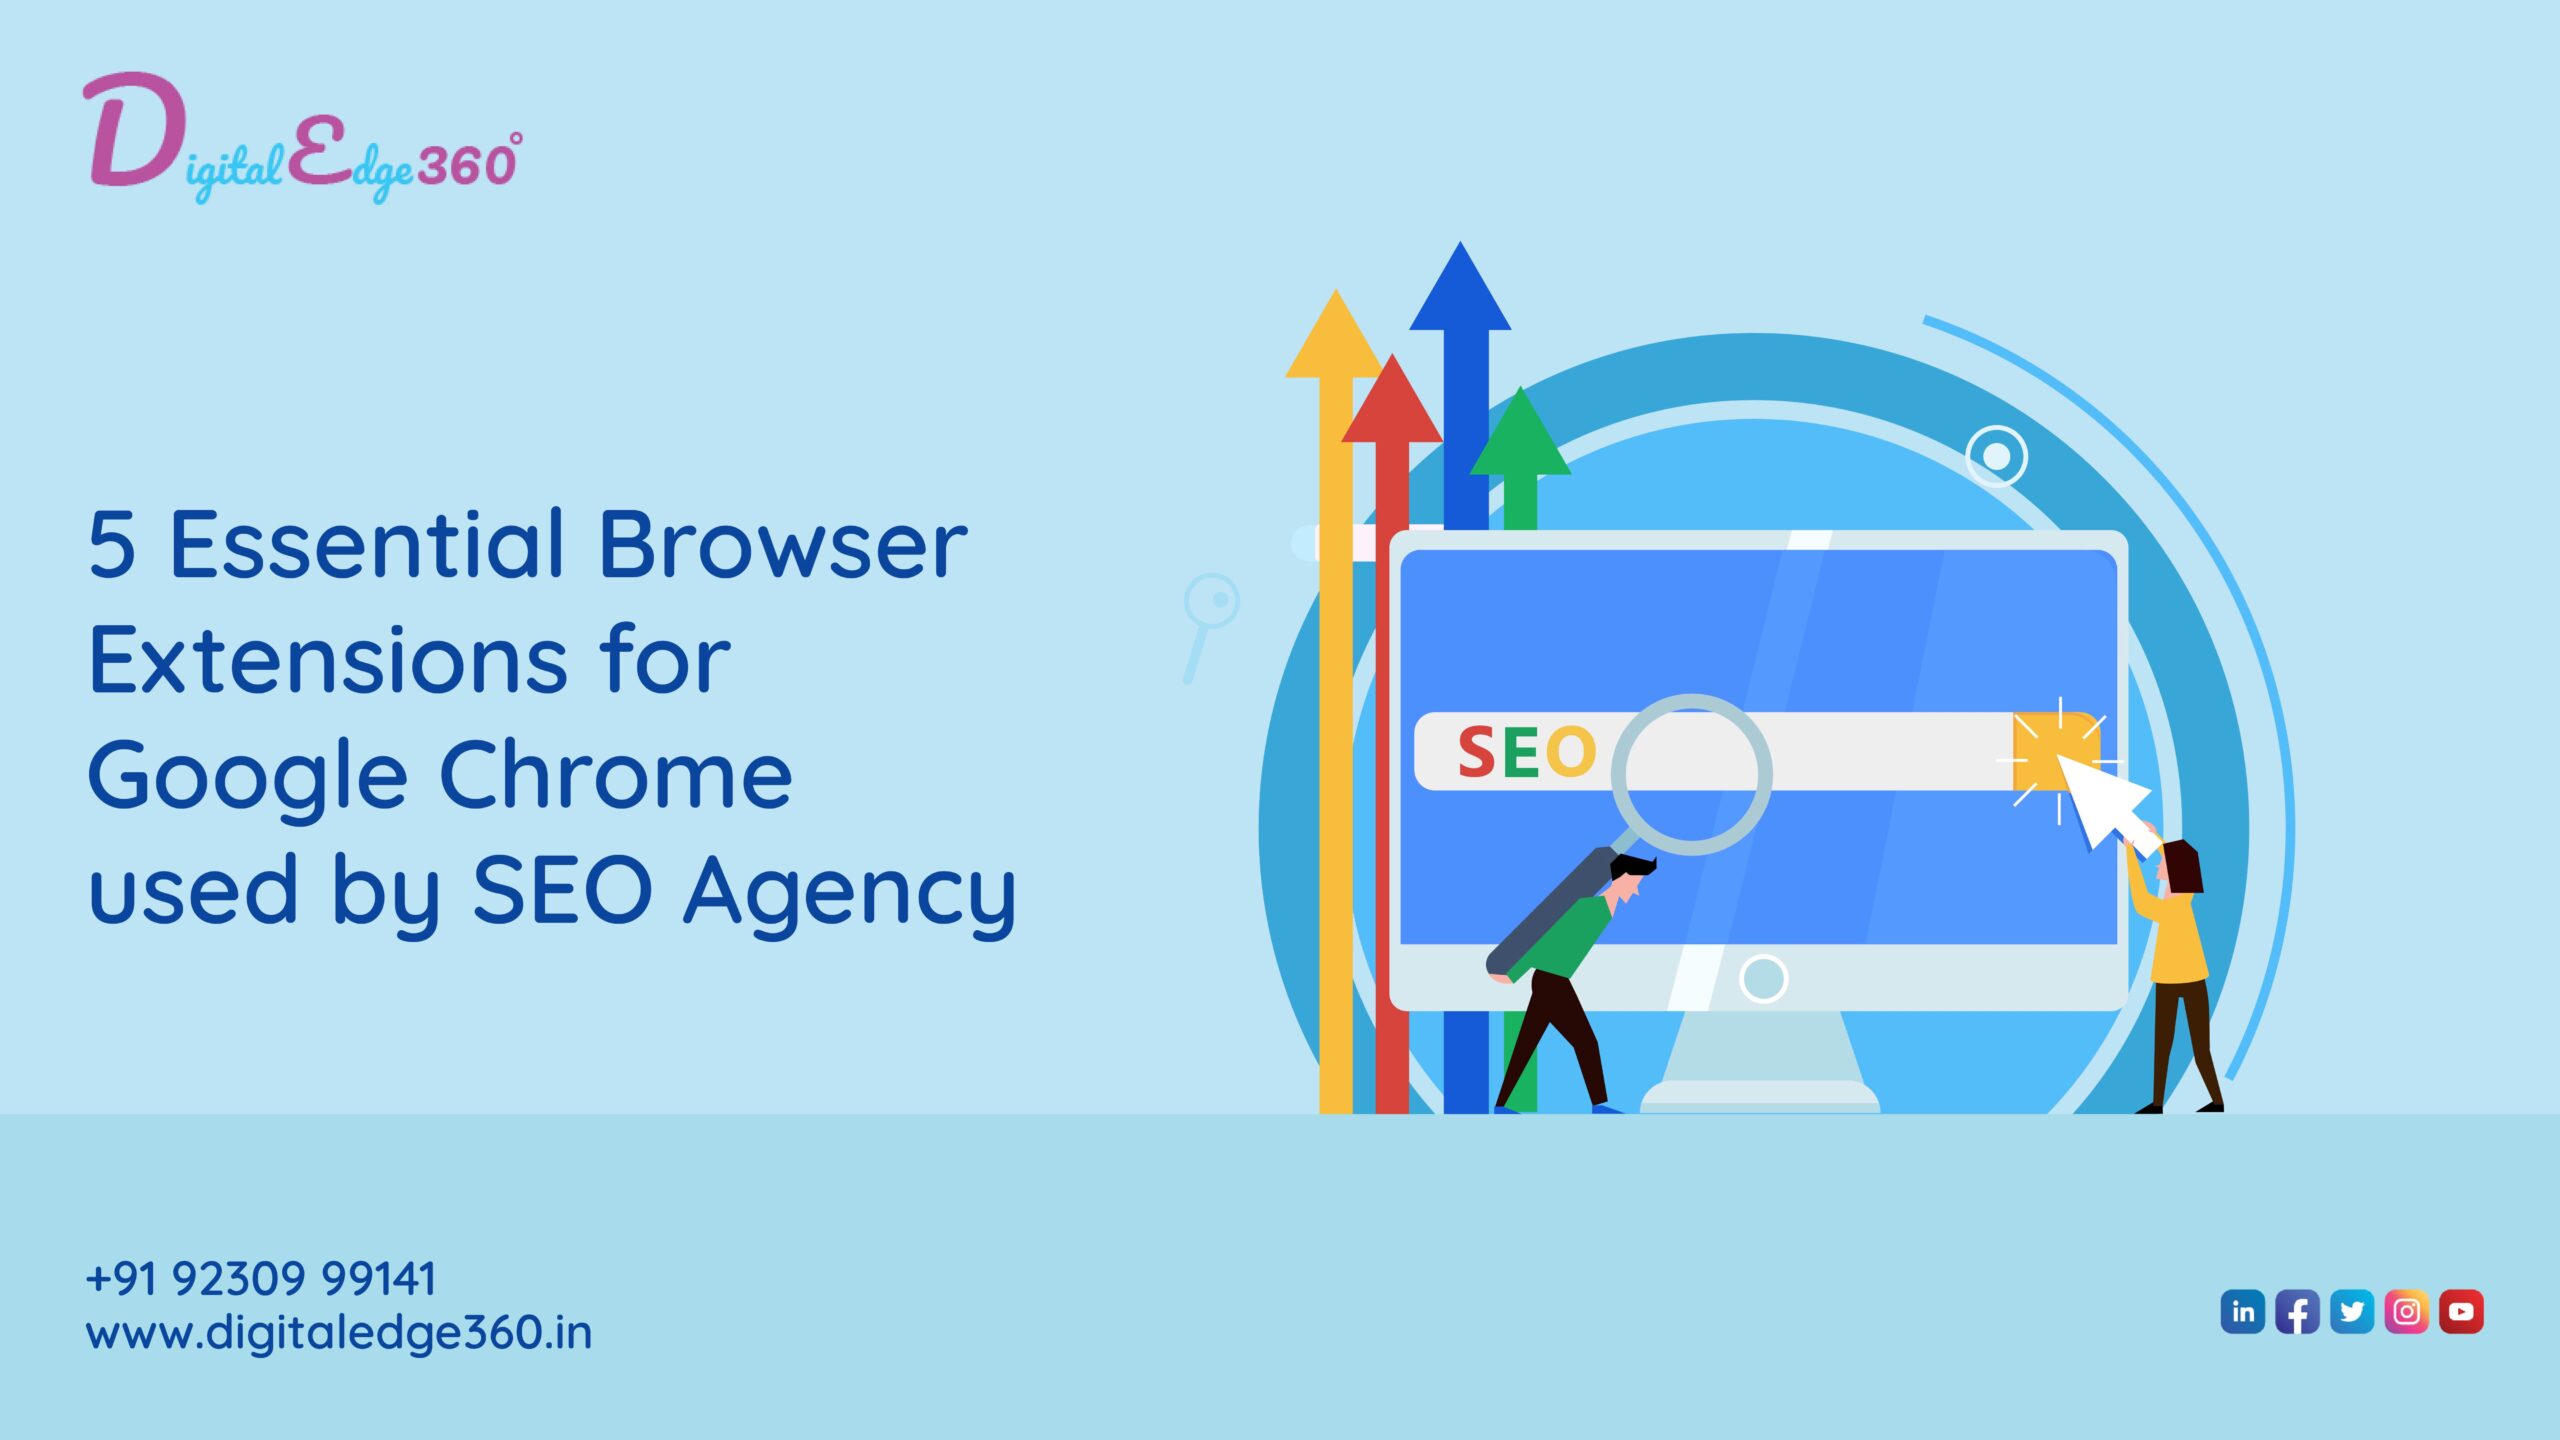 5 Essential Browser Extensions for Google Chrome used by SEO Agency